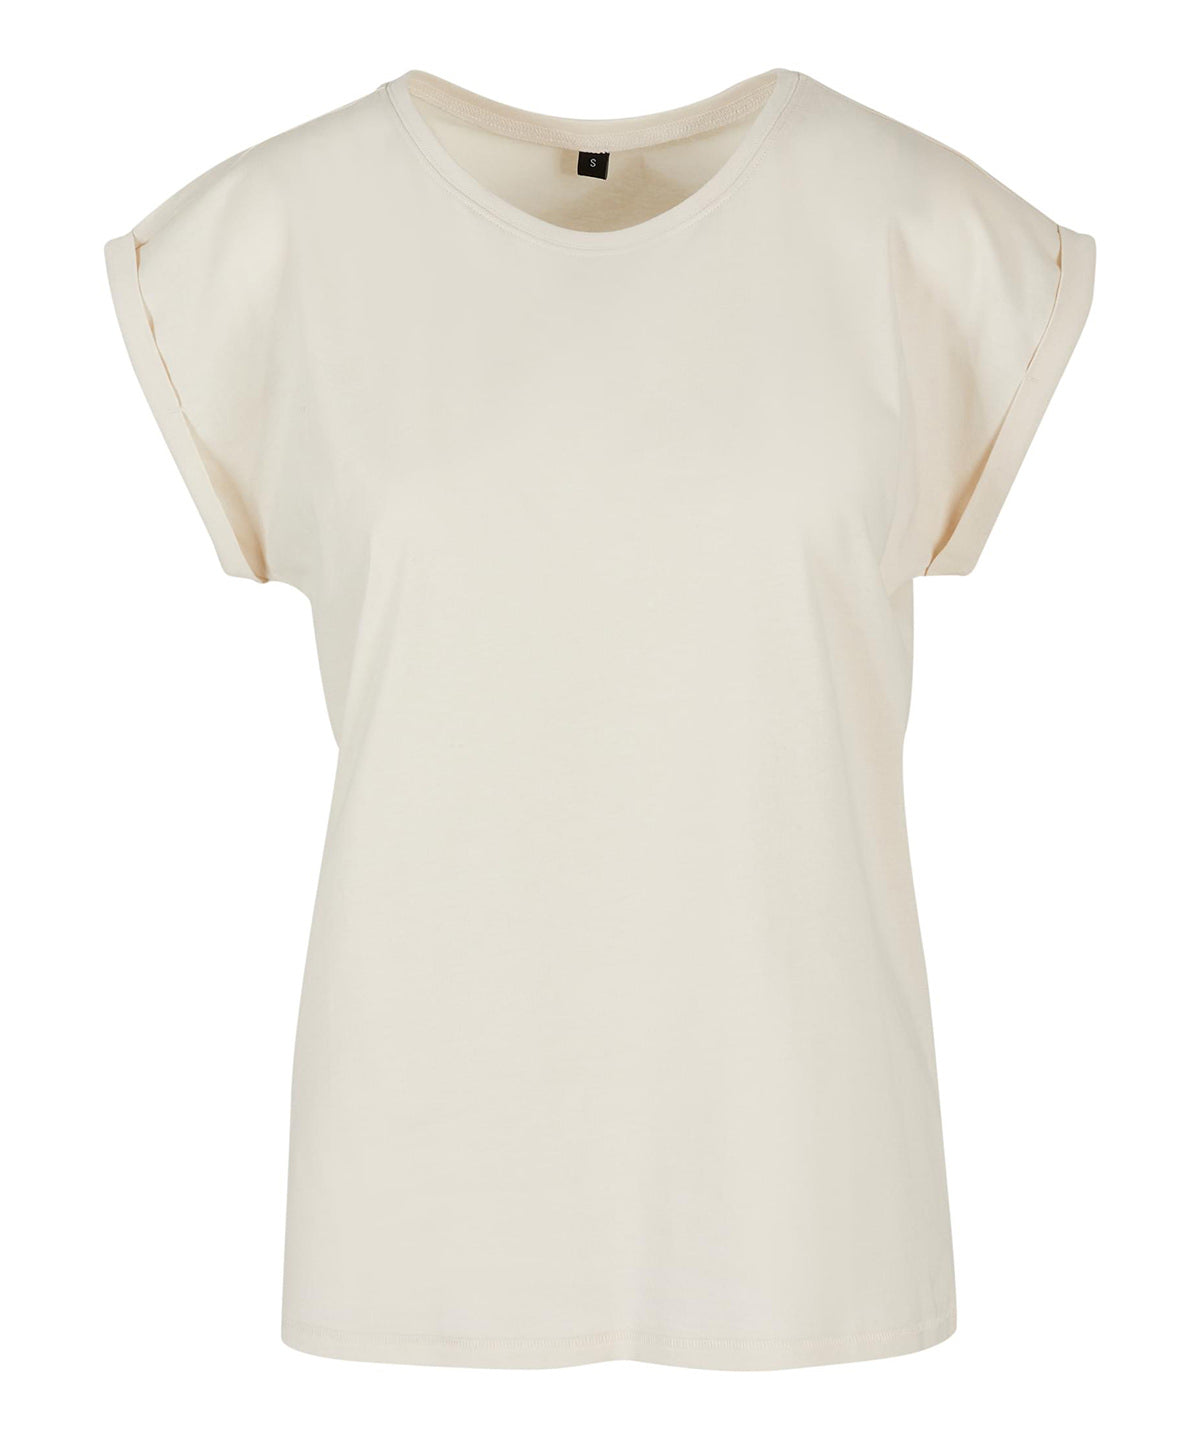 Build Your Brand Womens Extended Shoulder Tee Sand